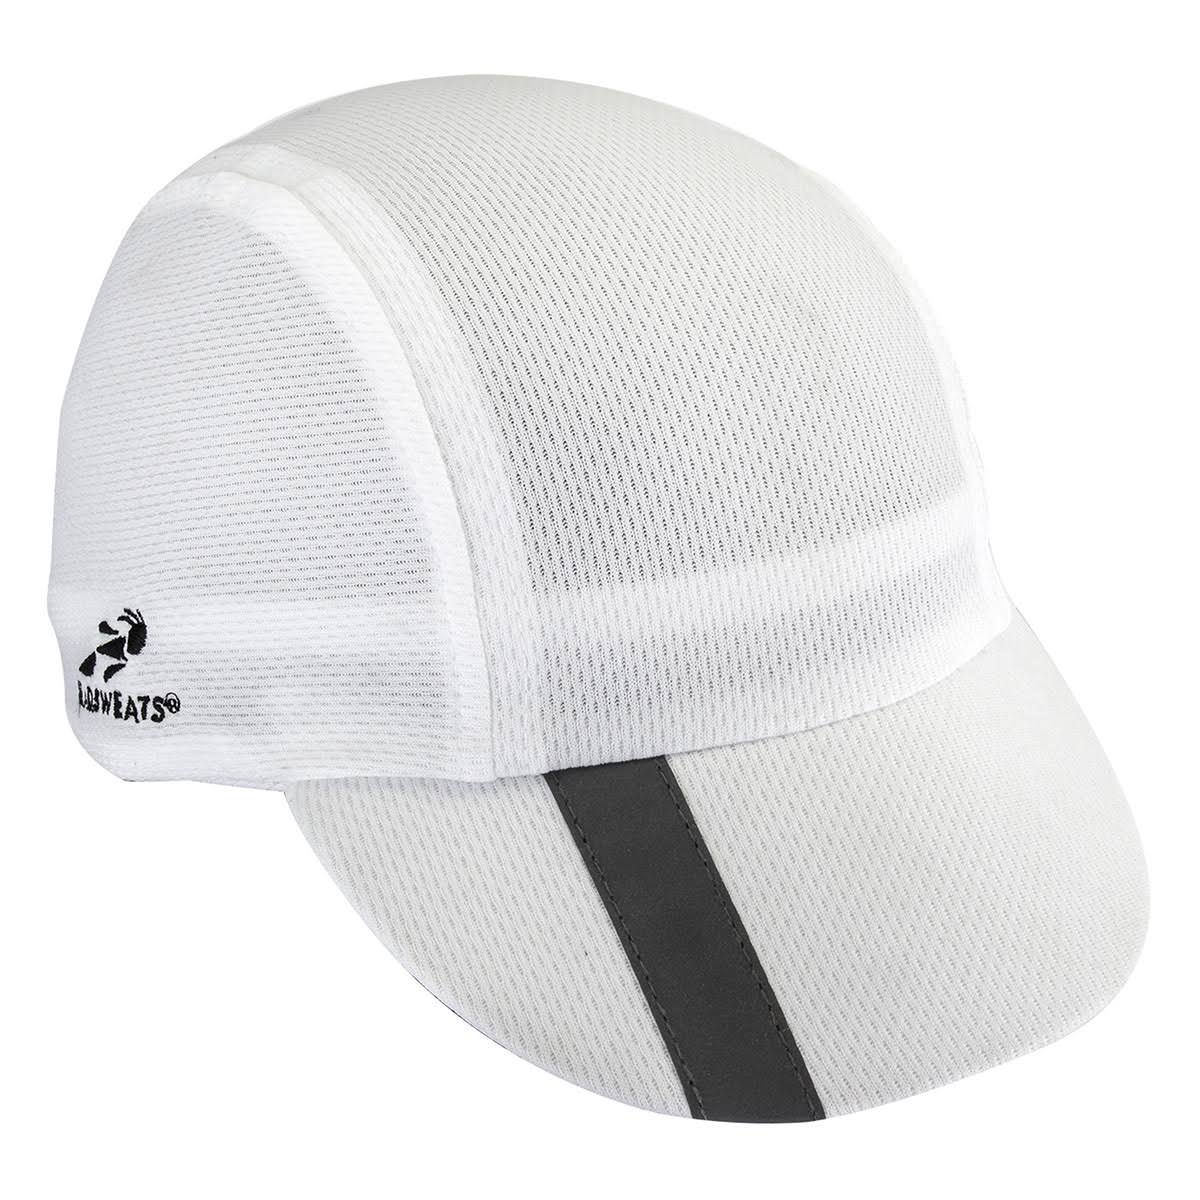 Headsweats Spin Cycle Cap - White